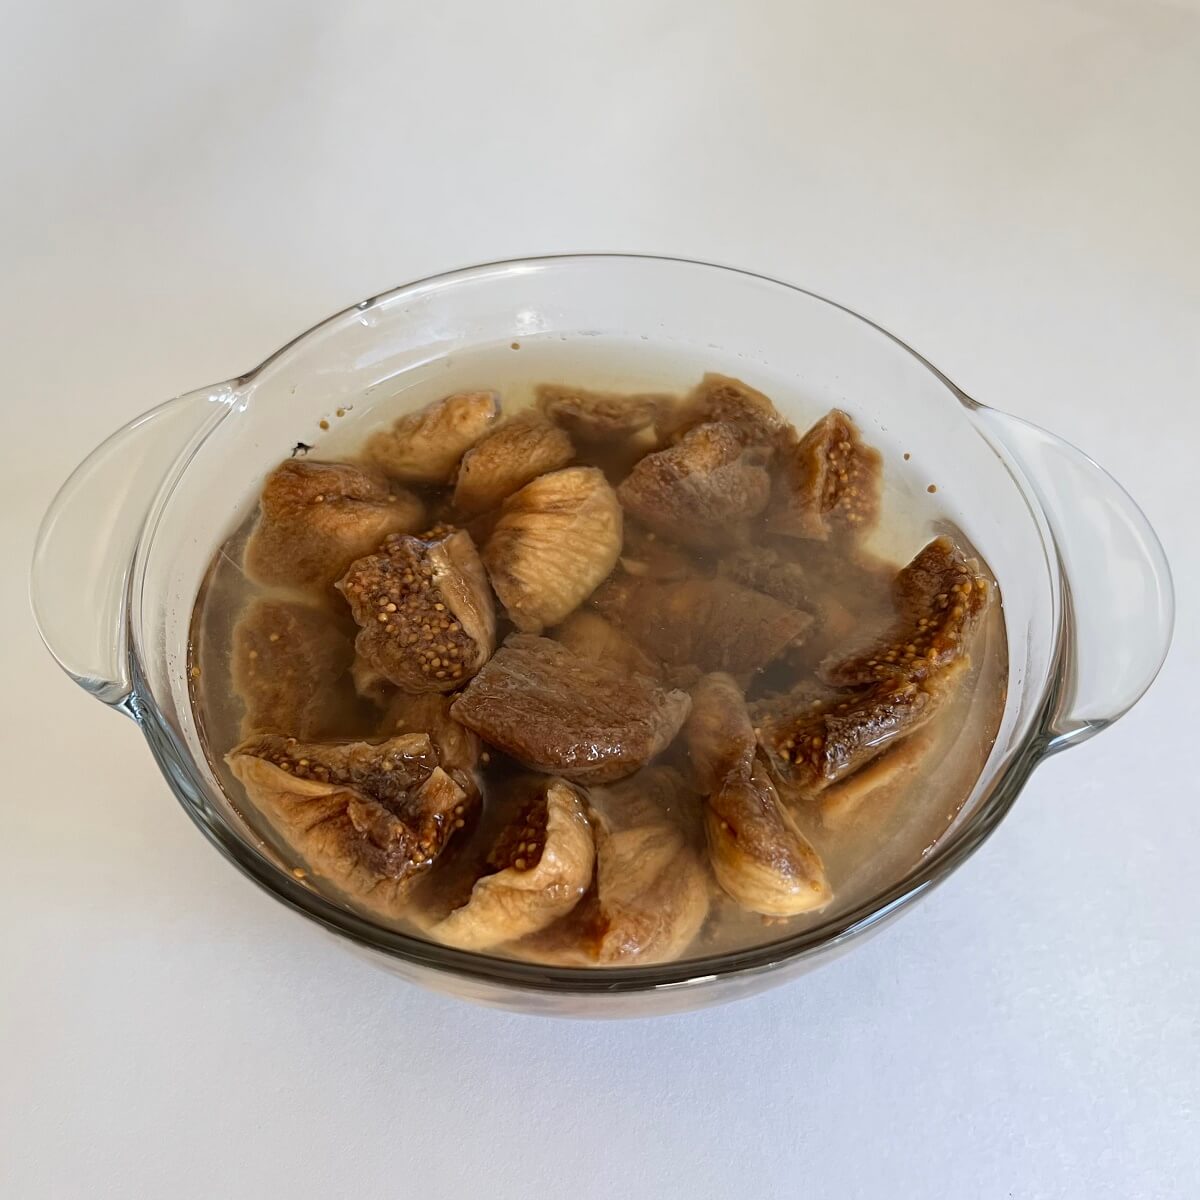 Chopped figs soaking in water in a glass bowl.